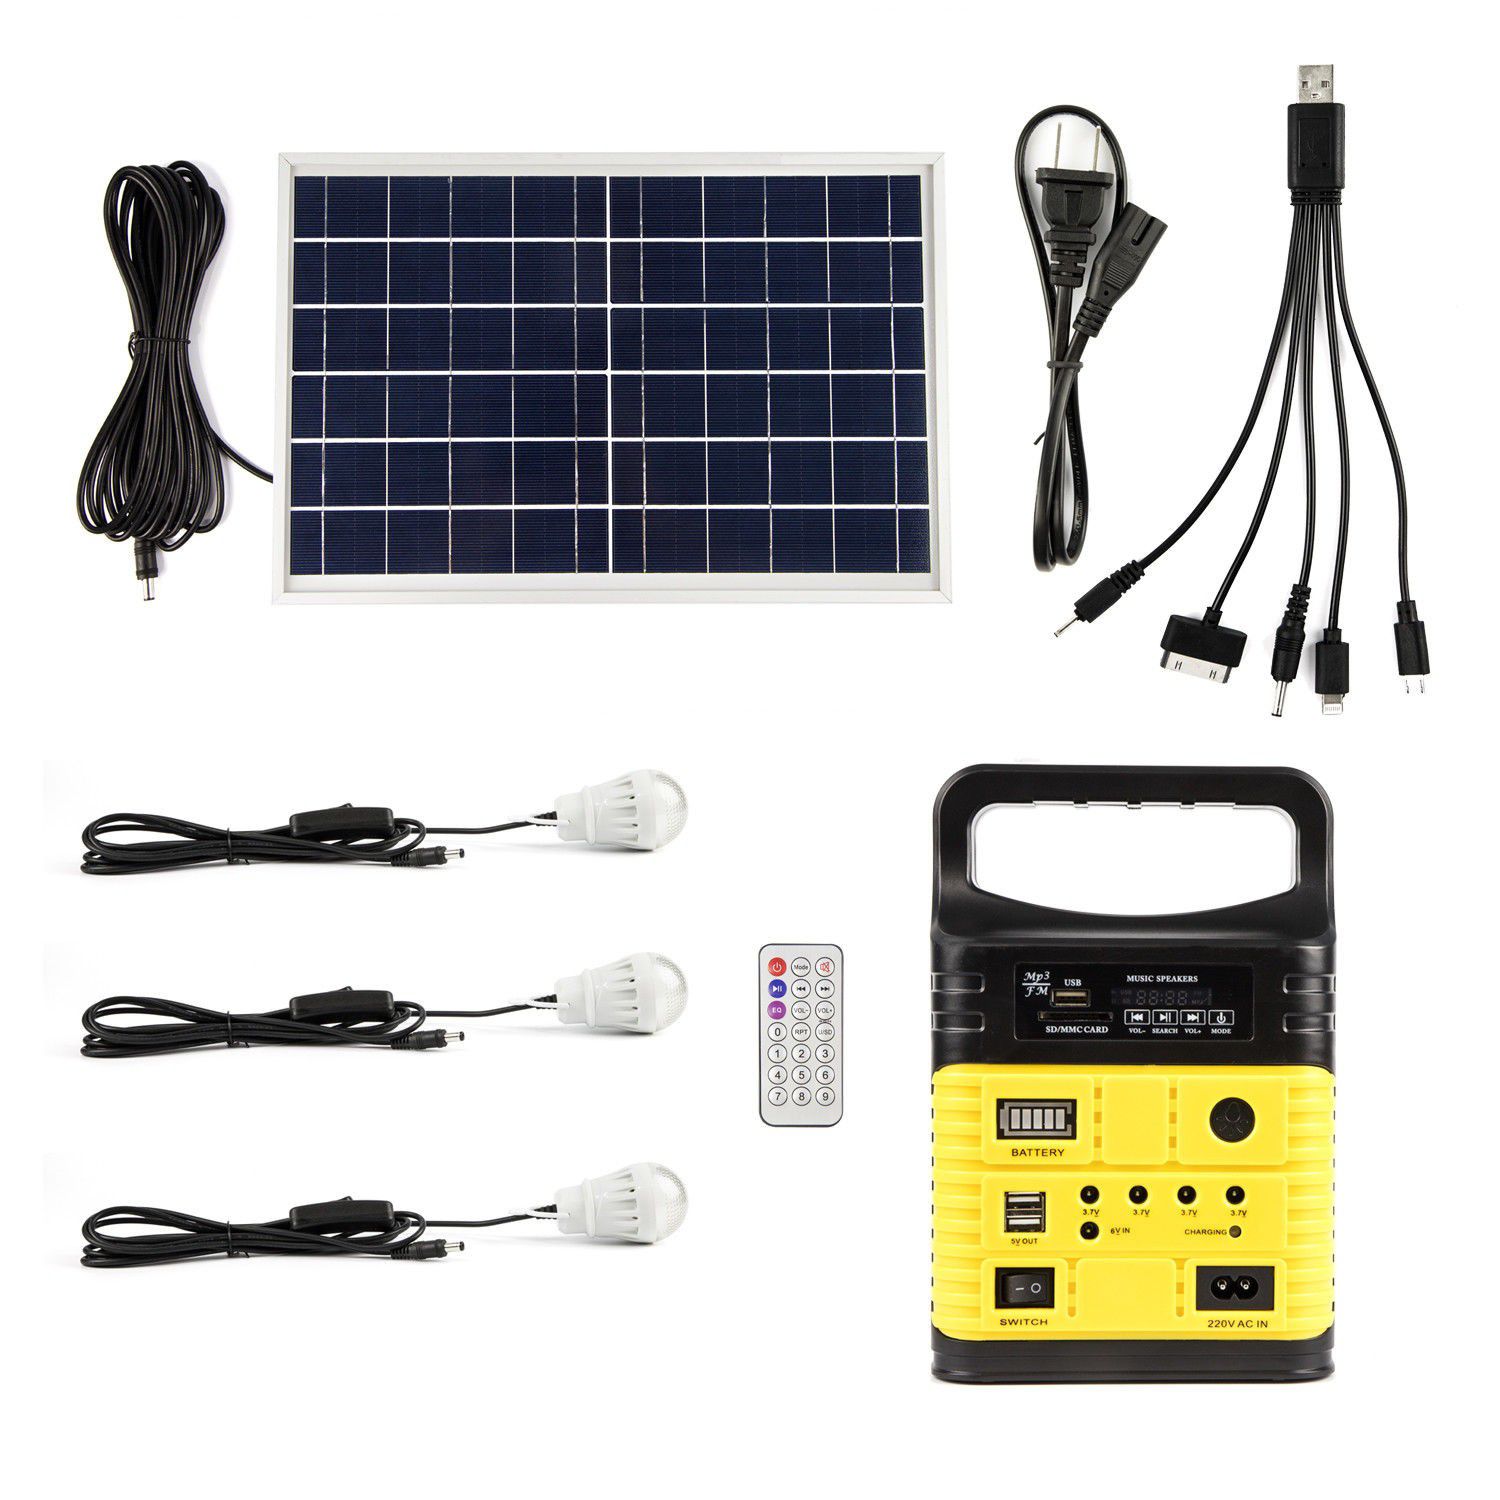 Solar generator lighting home system kit 12v 10W with solar panel and 3 USB lamps